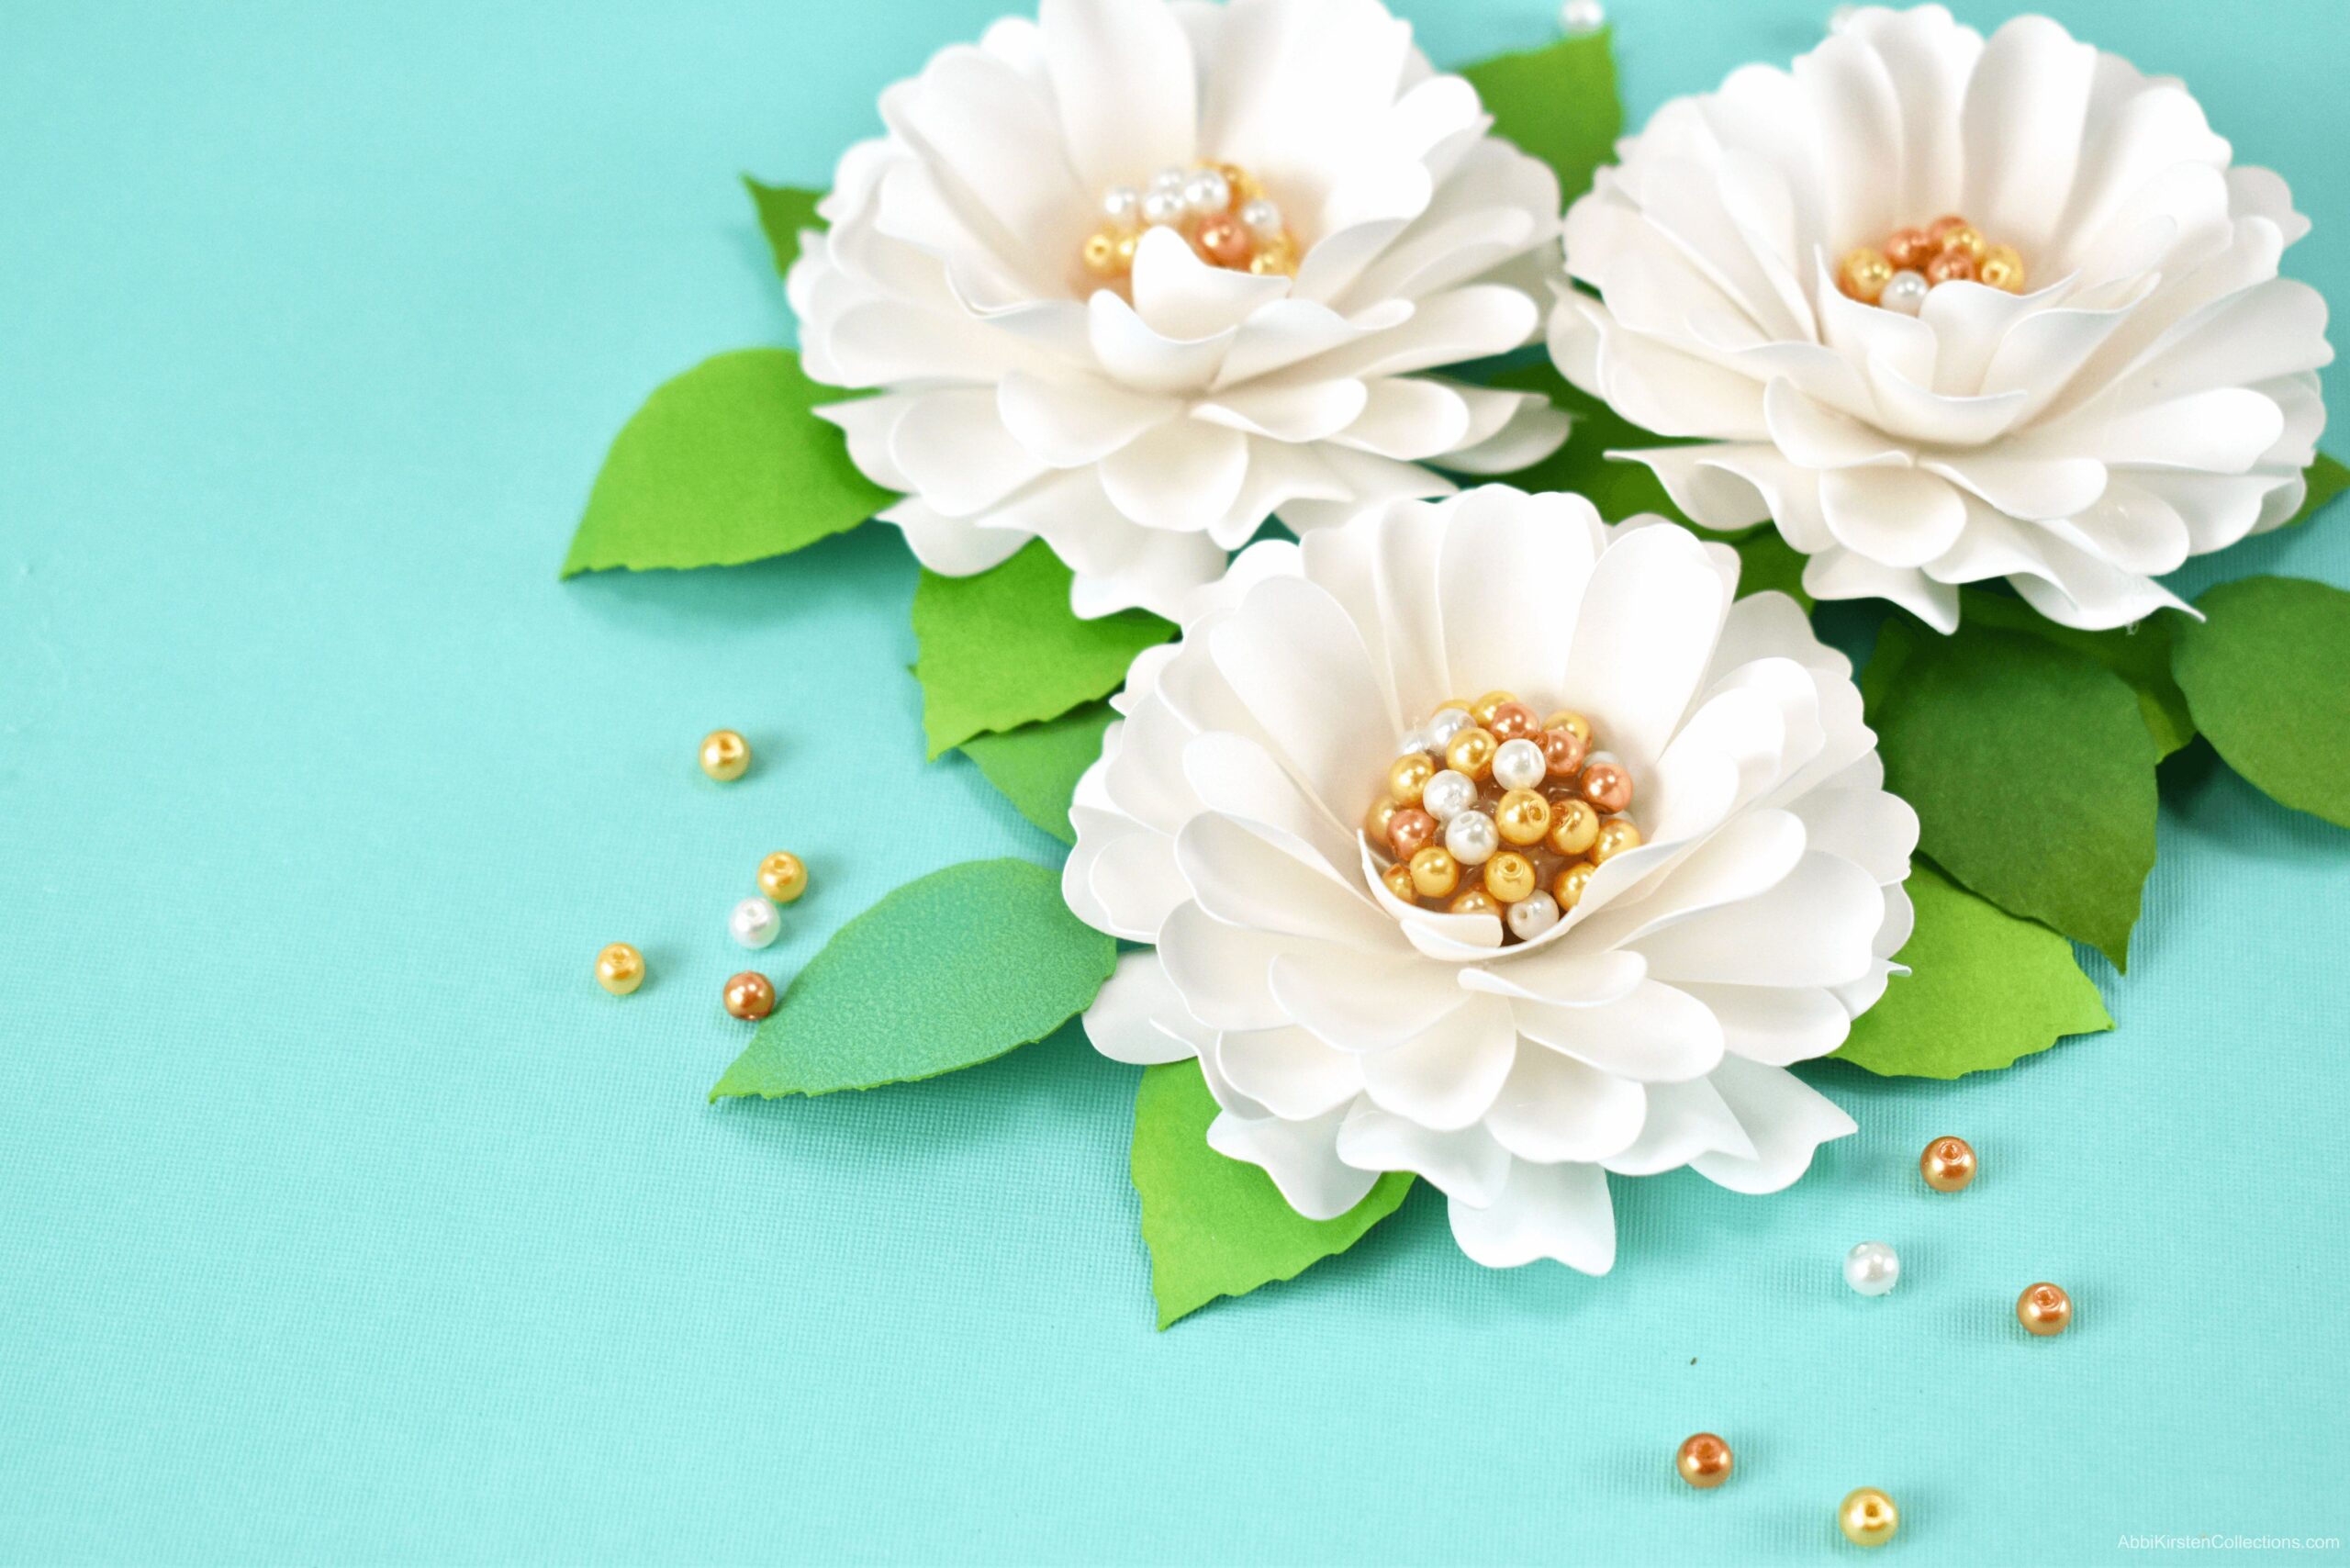 Three pearl-centered paper dahlia flowers sit on a light blue background. Gold and white pearls are scattered around the flowers.